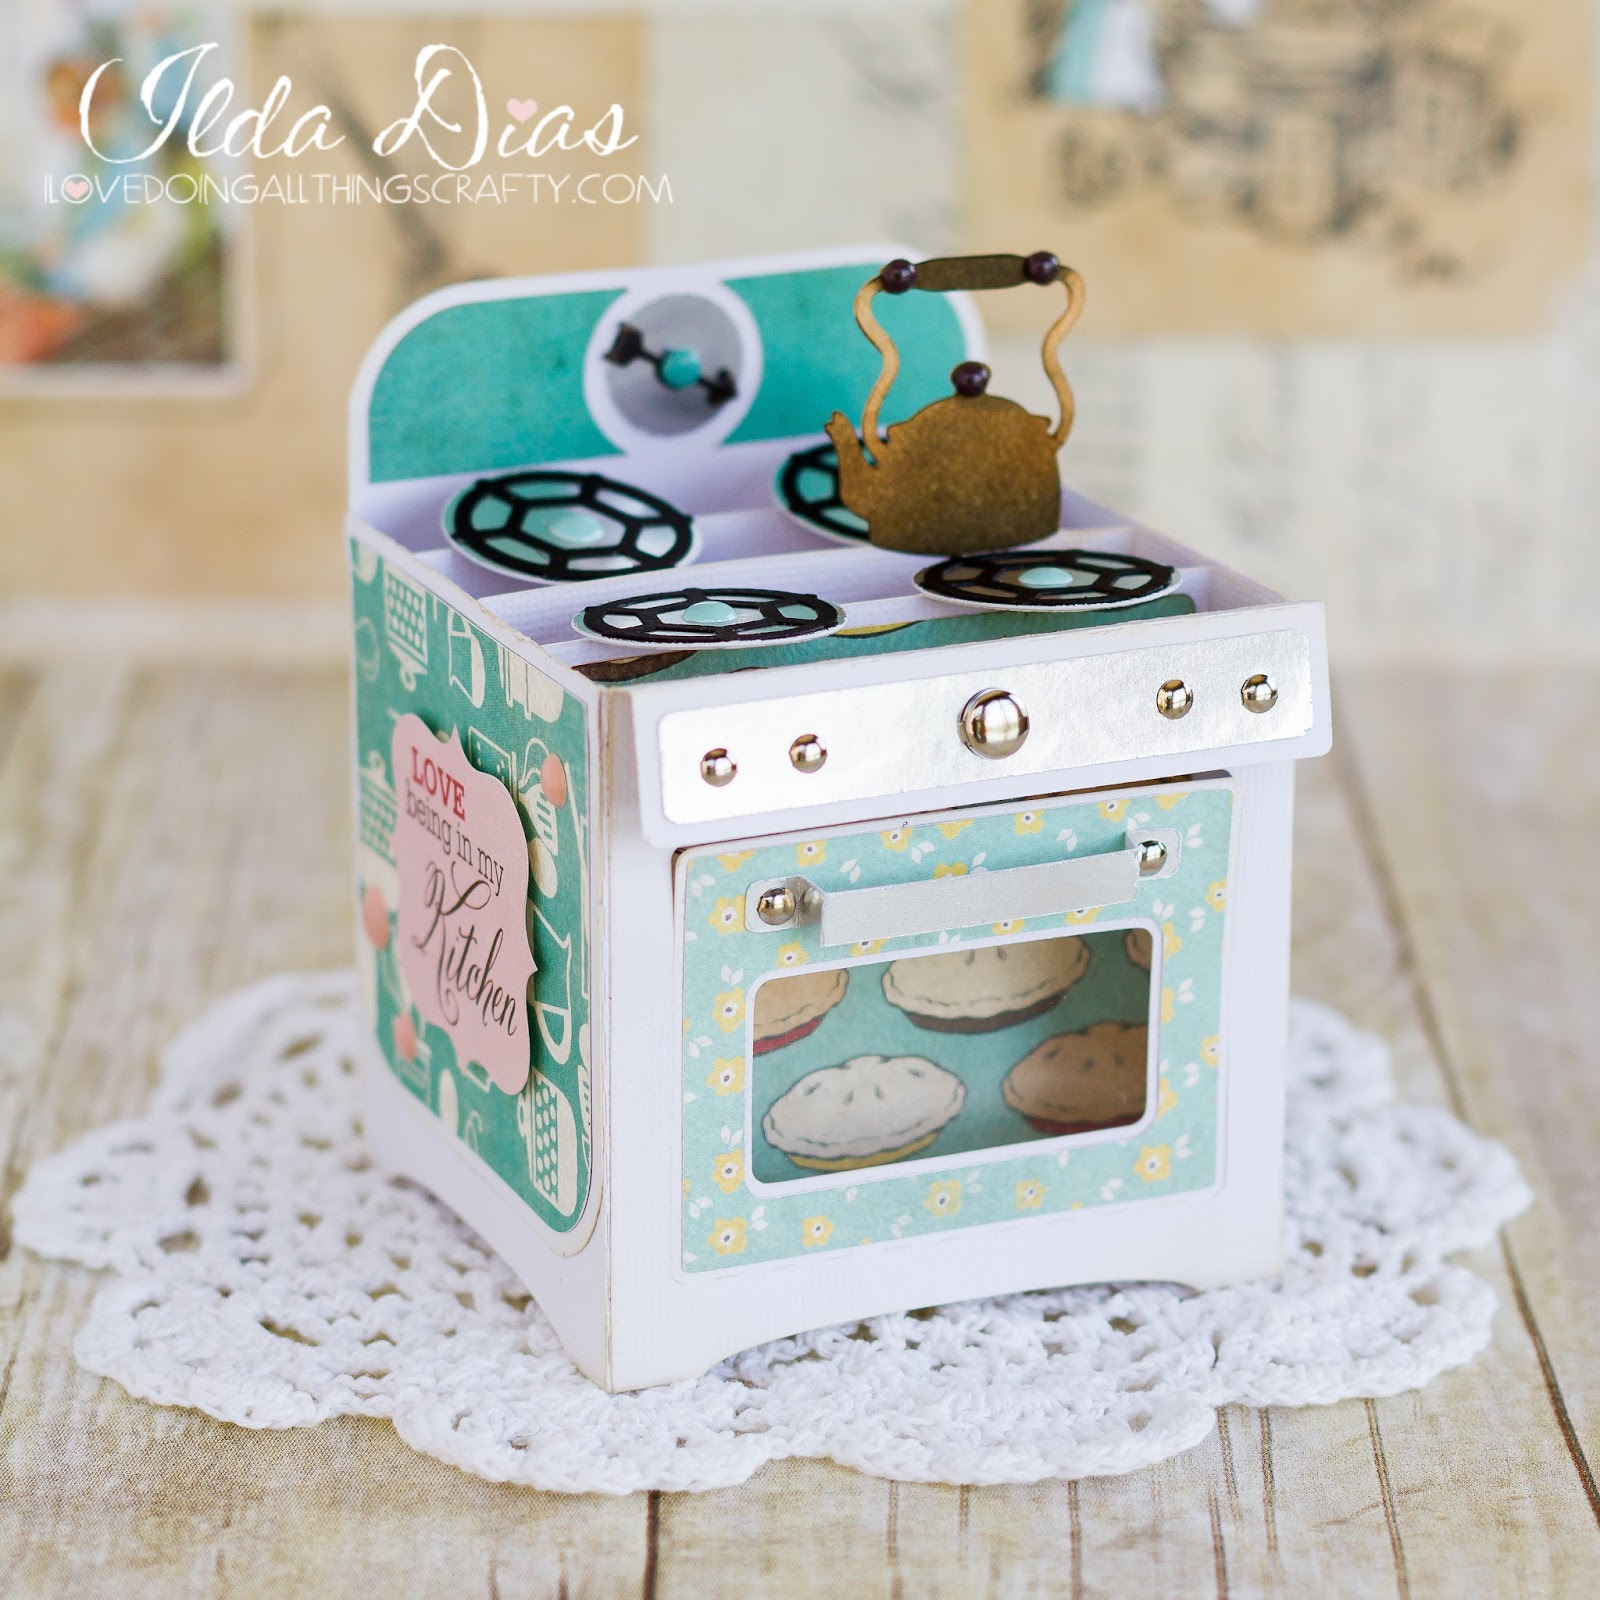 Download I Love Doing All Things Crafty: Mother's Day Retro Oven ...